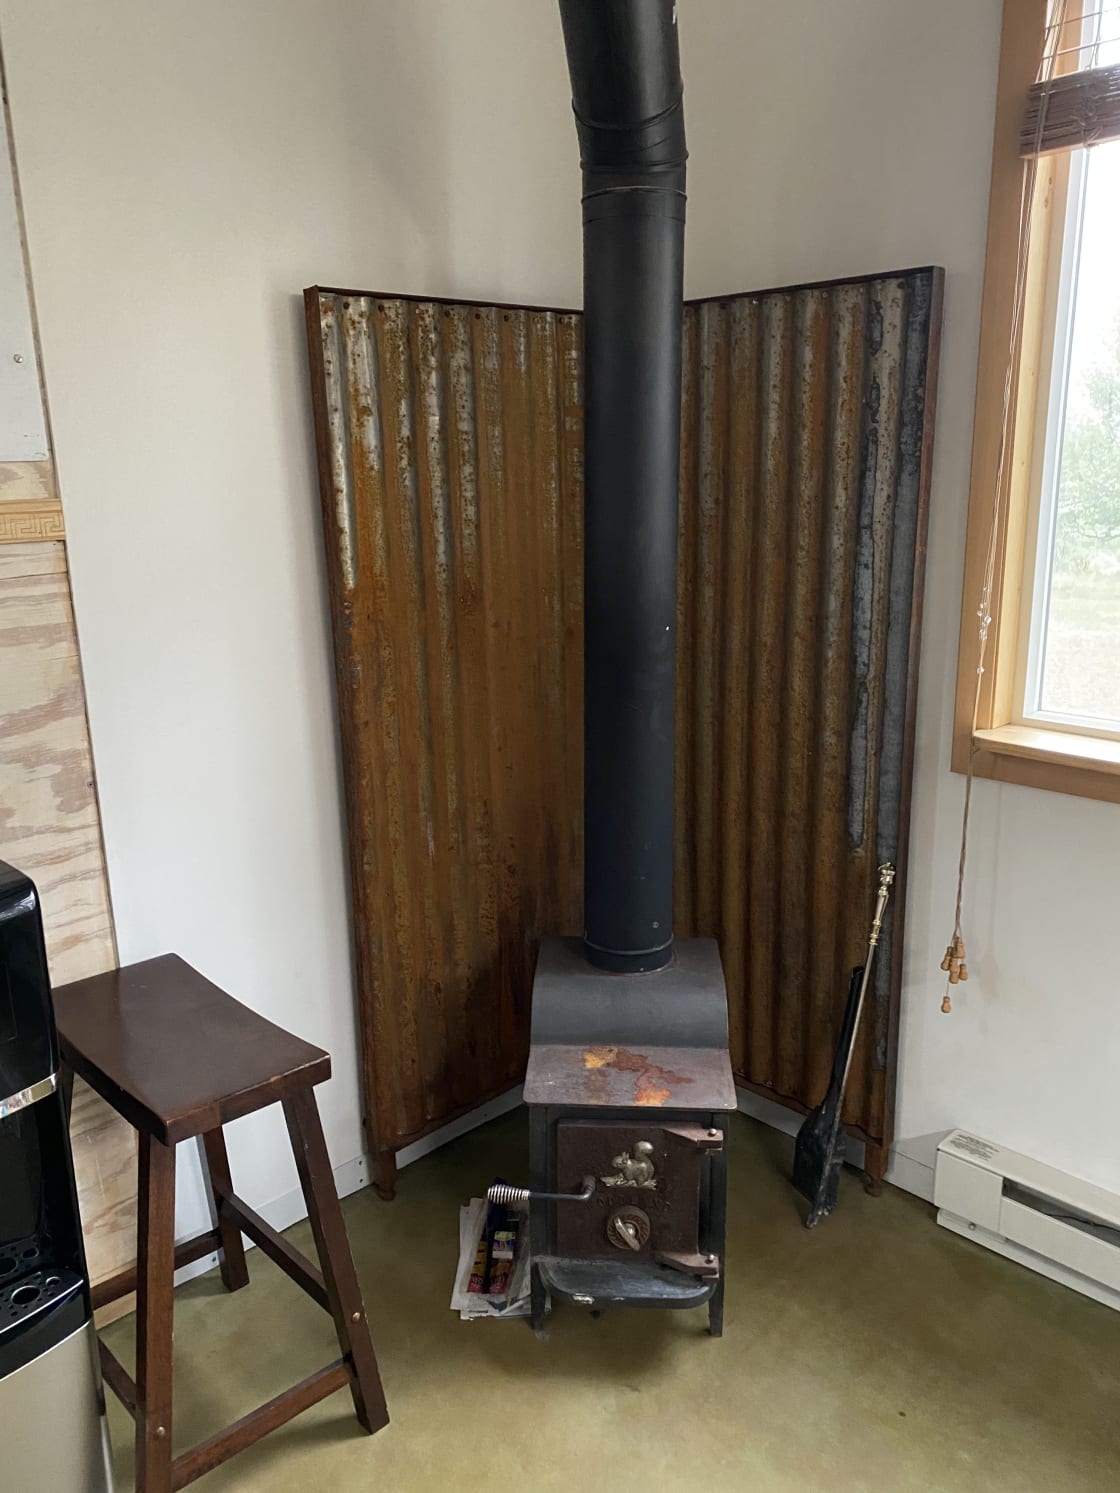 Sweet and cozy woodstove!